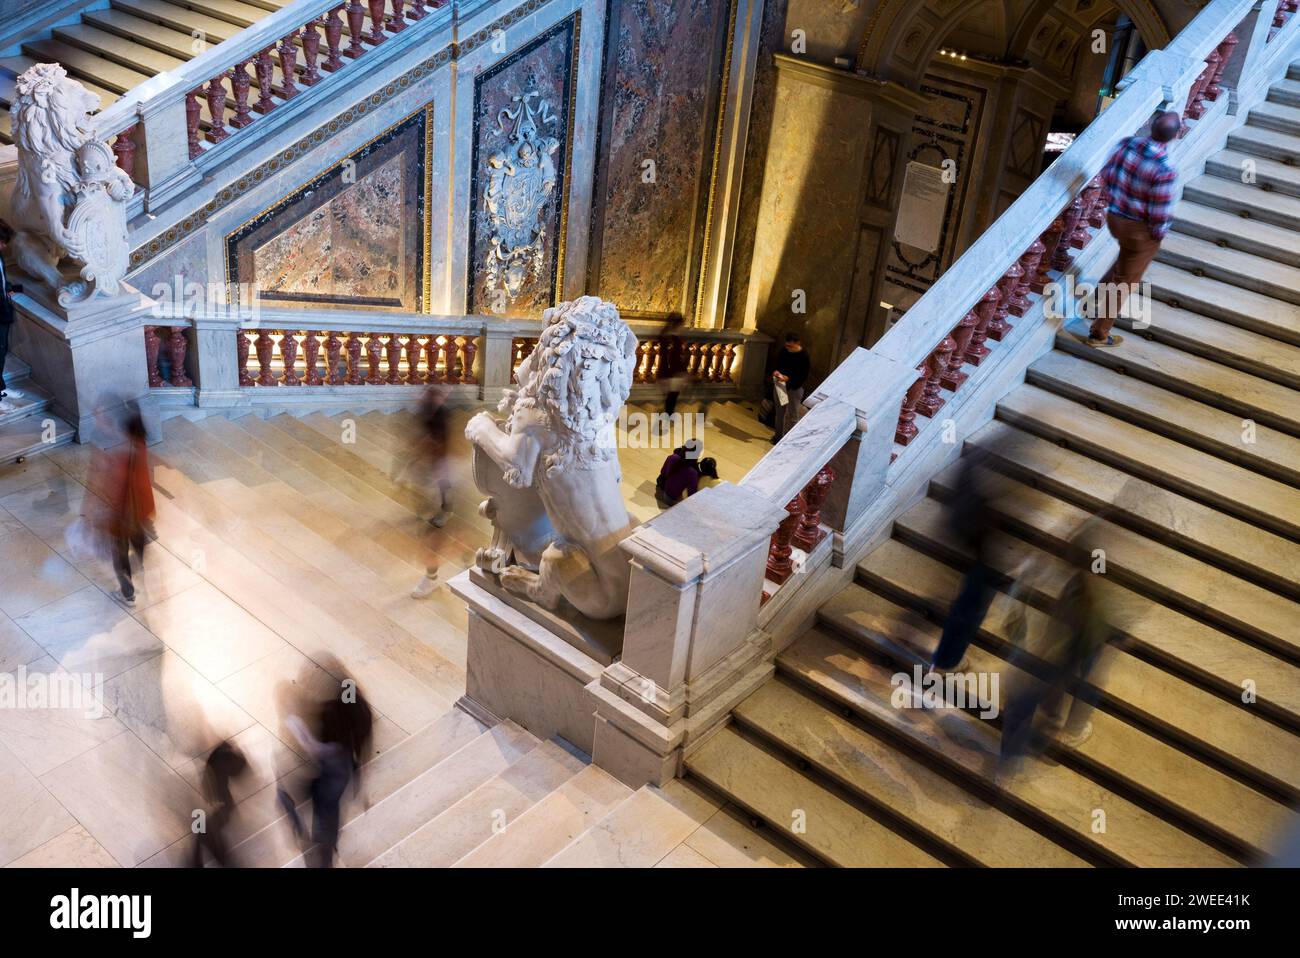 Art history Museum visitors on a staircase Stock Photo